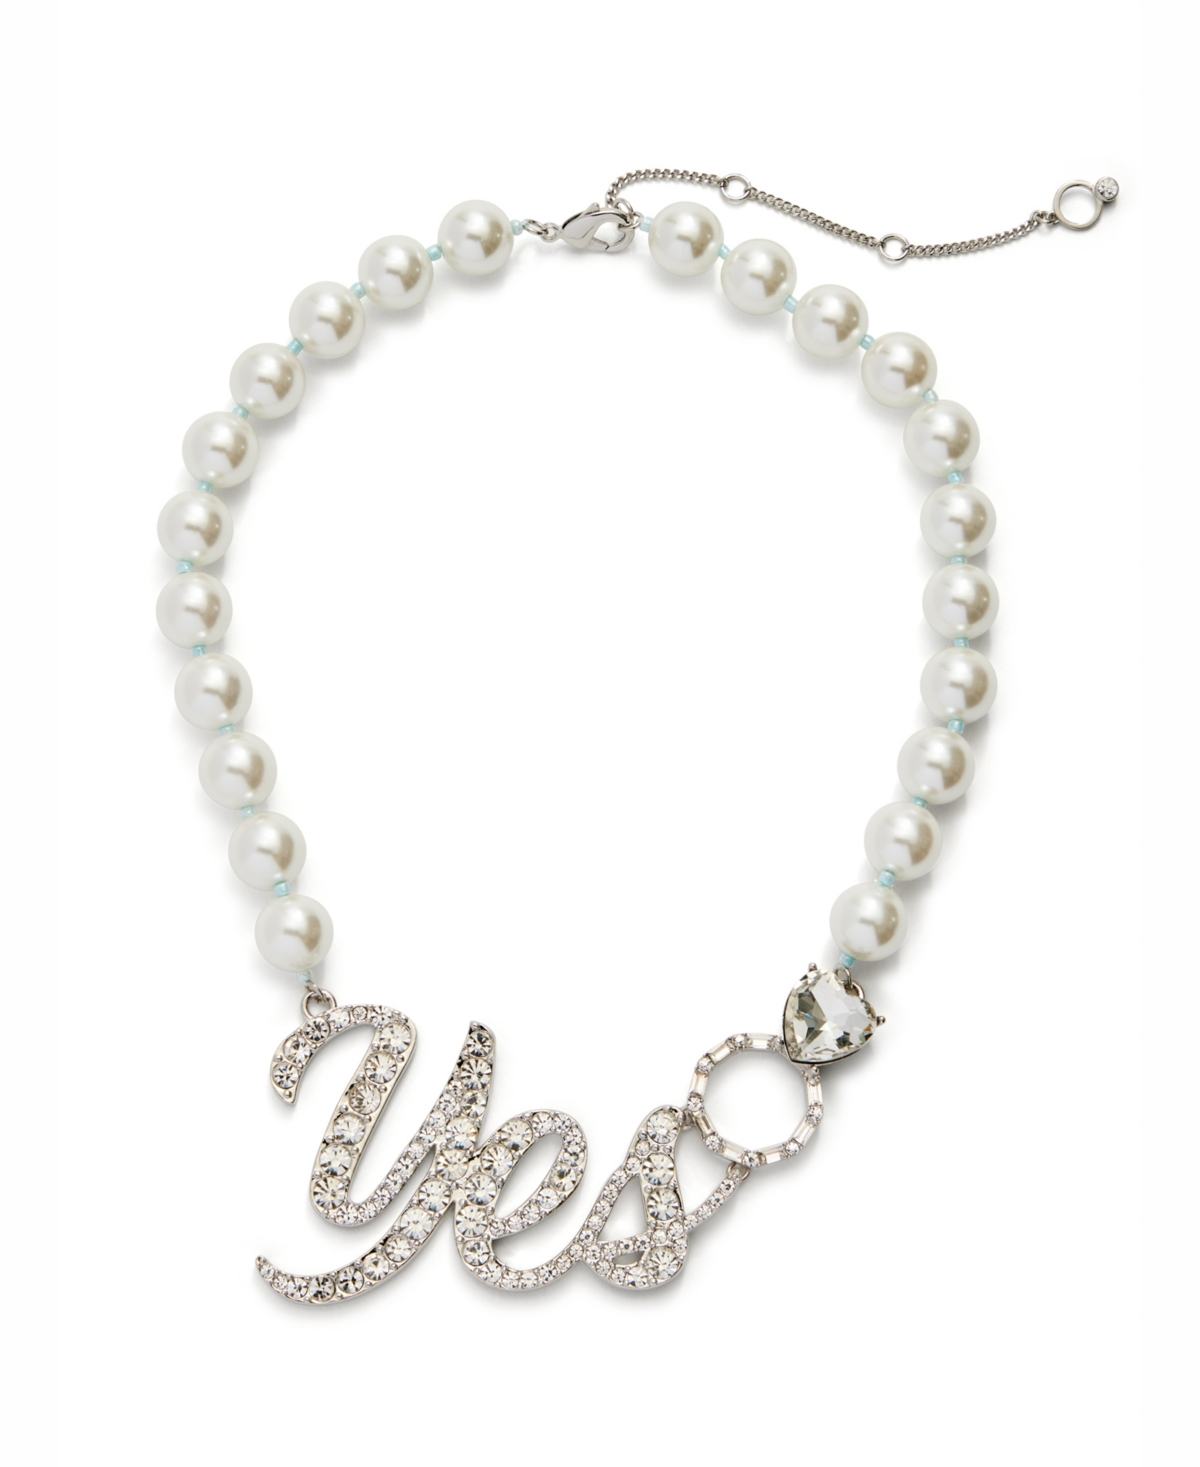 Faux Stone Yes Imitation Pearl Statement Necklace - Crystal, Rhodium